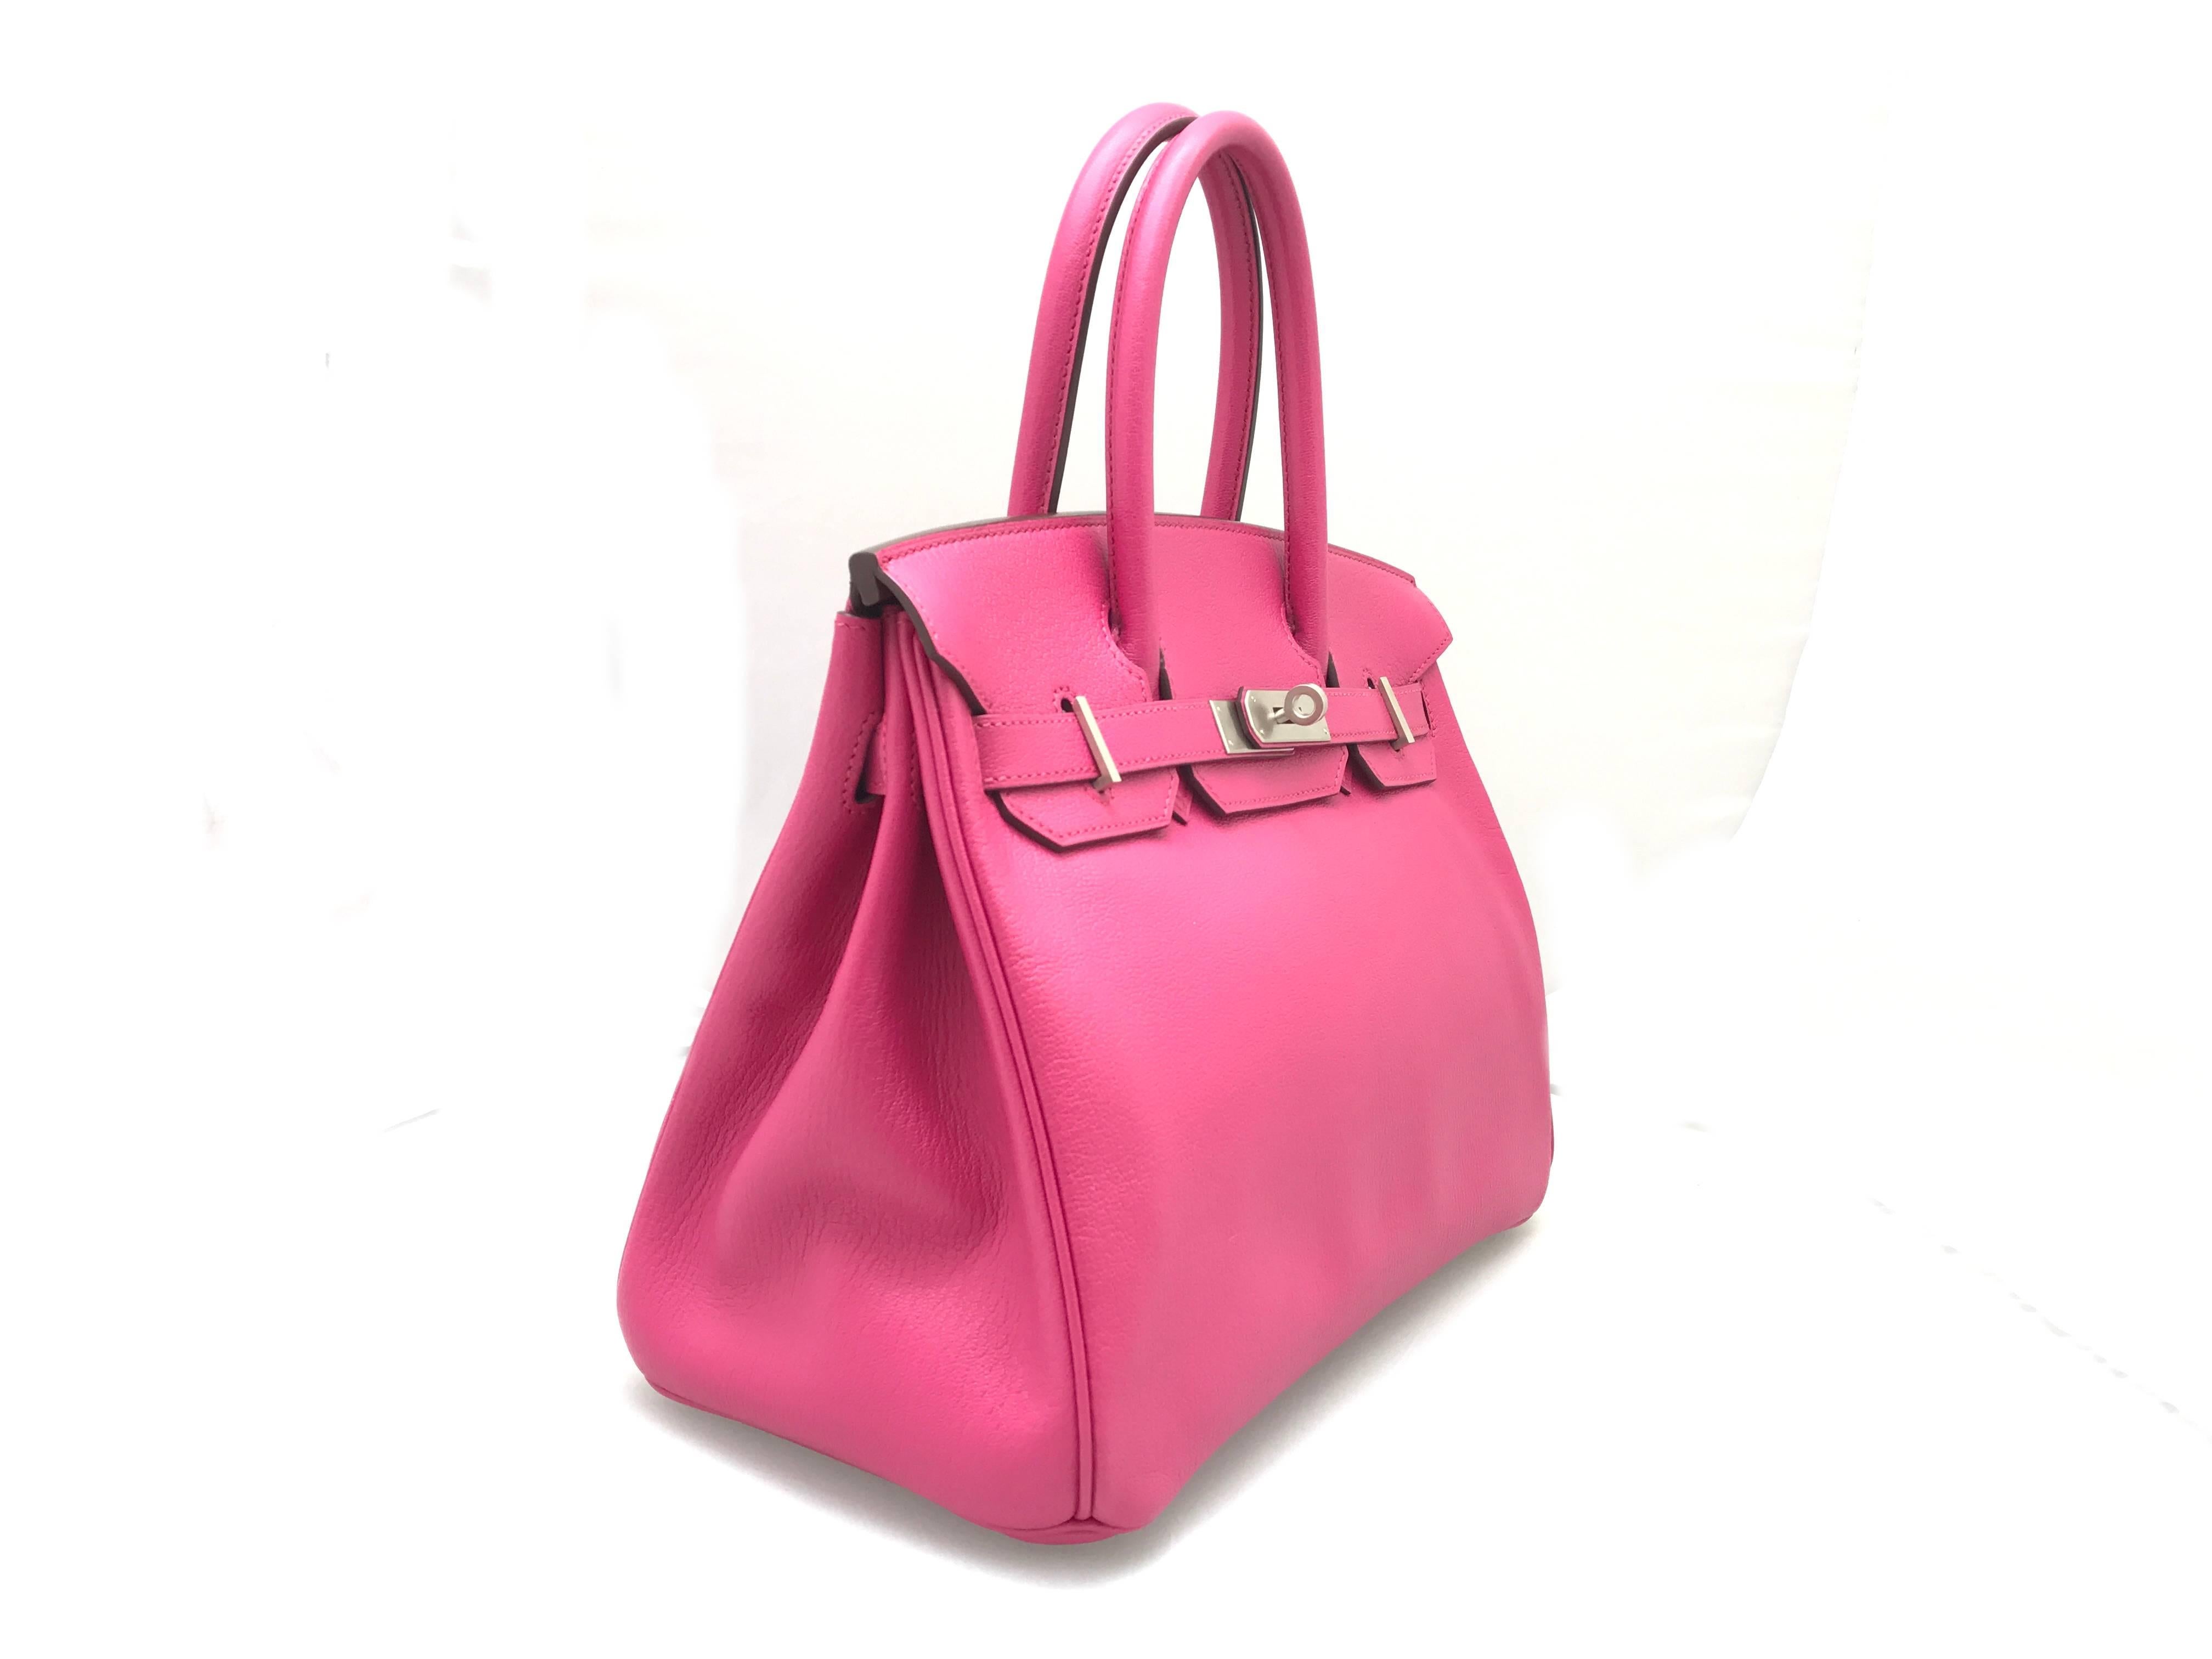 Color: Pink / Rose Tyrien (designer color) 

Material: Chevre Leather 

Condition: Rank A 
Overall: Good, few minor defects. 
Surface: Minor Scratches
Corners: Obvious Scratches 
Edges: Minor Scratches
Handles/Straps: Minor Scratches
Hardware: Minor